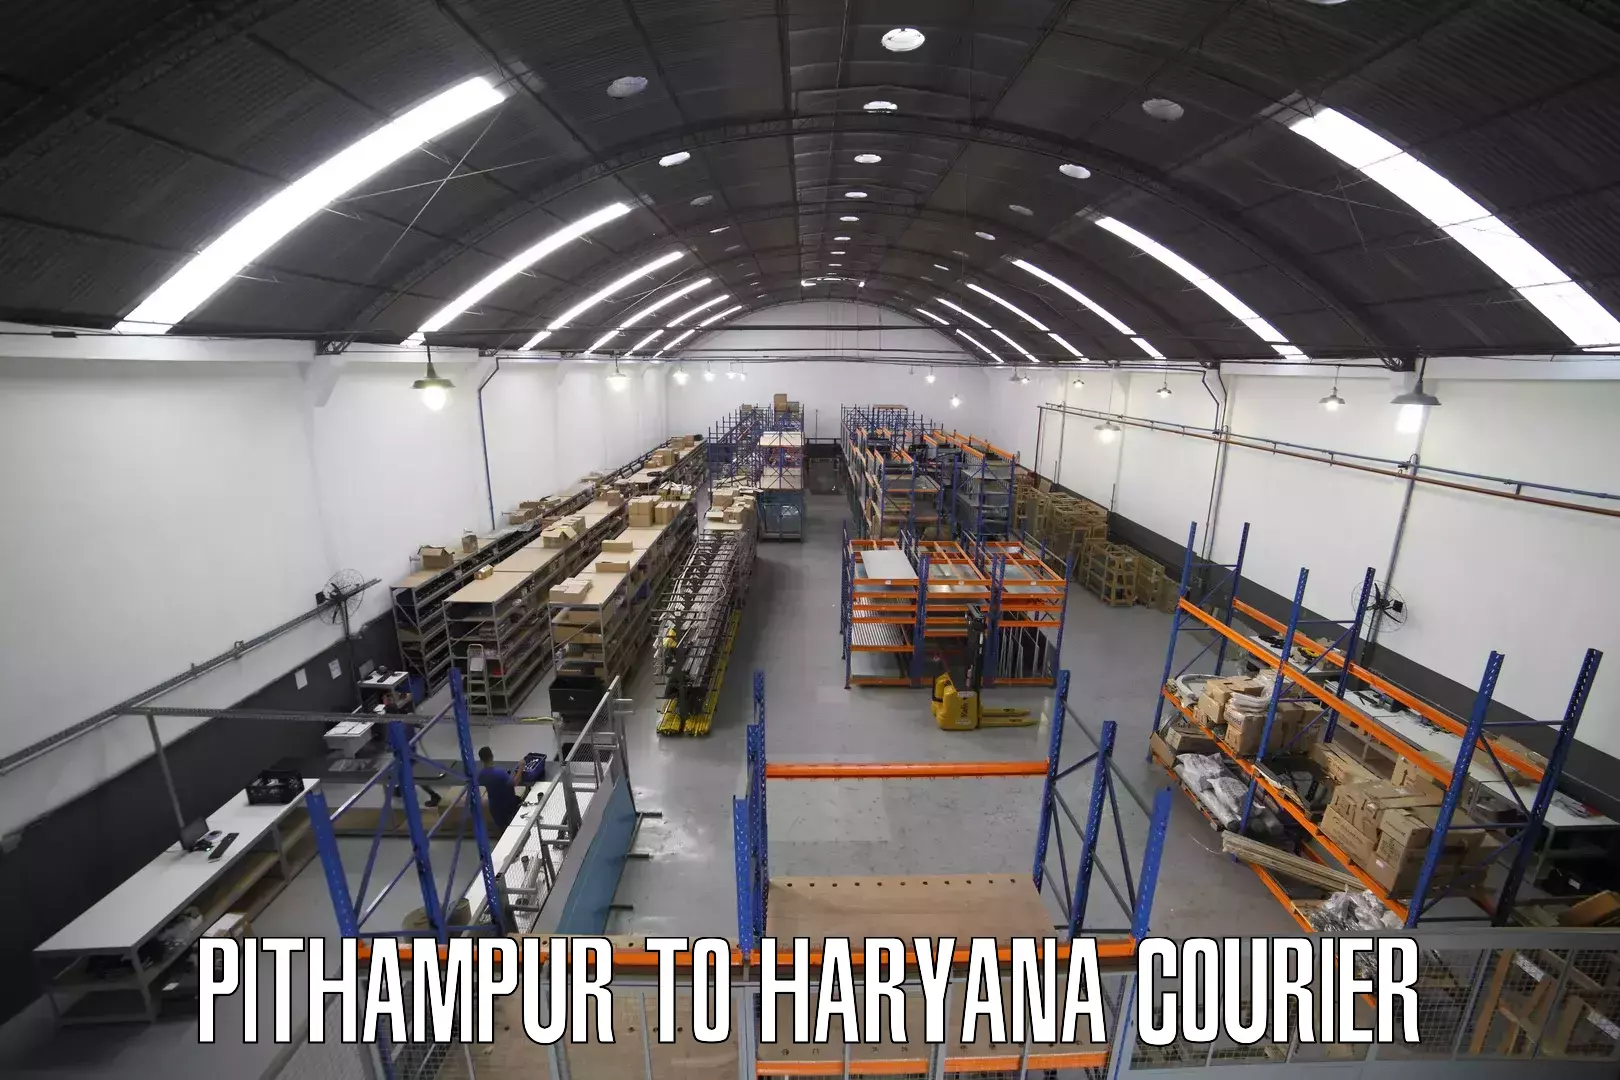 State-of-the-art courier technology Pithampur to Panchkula